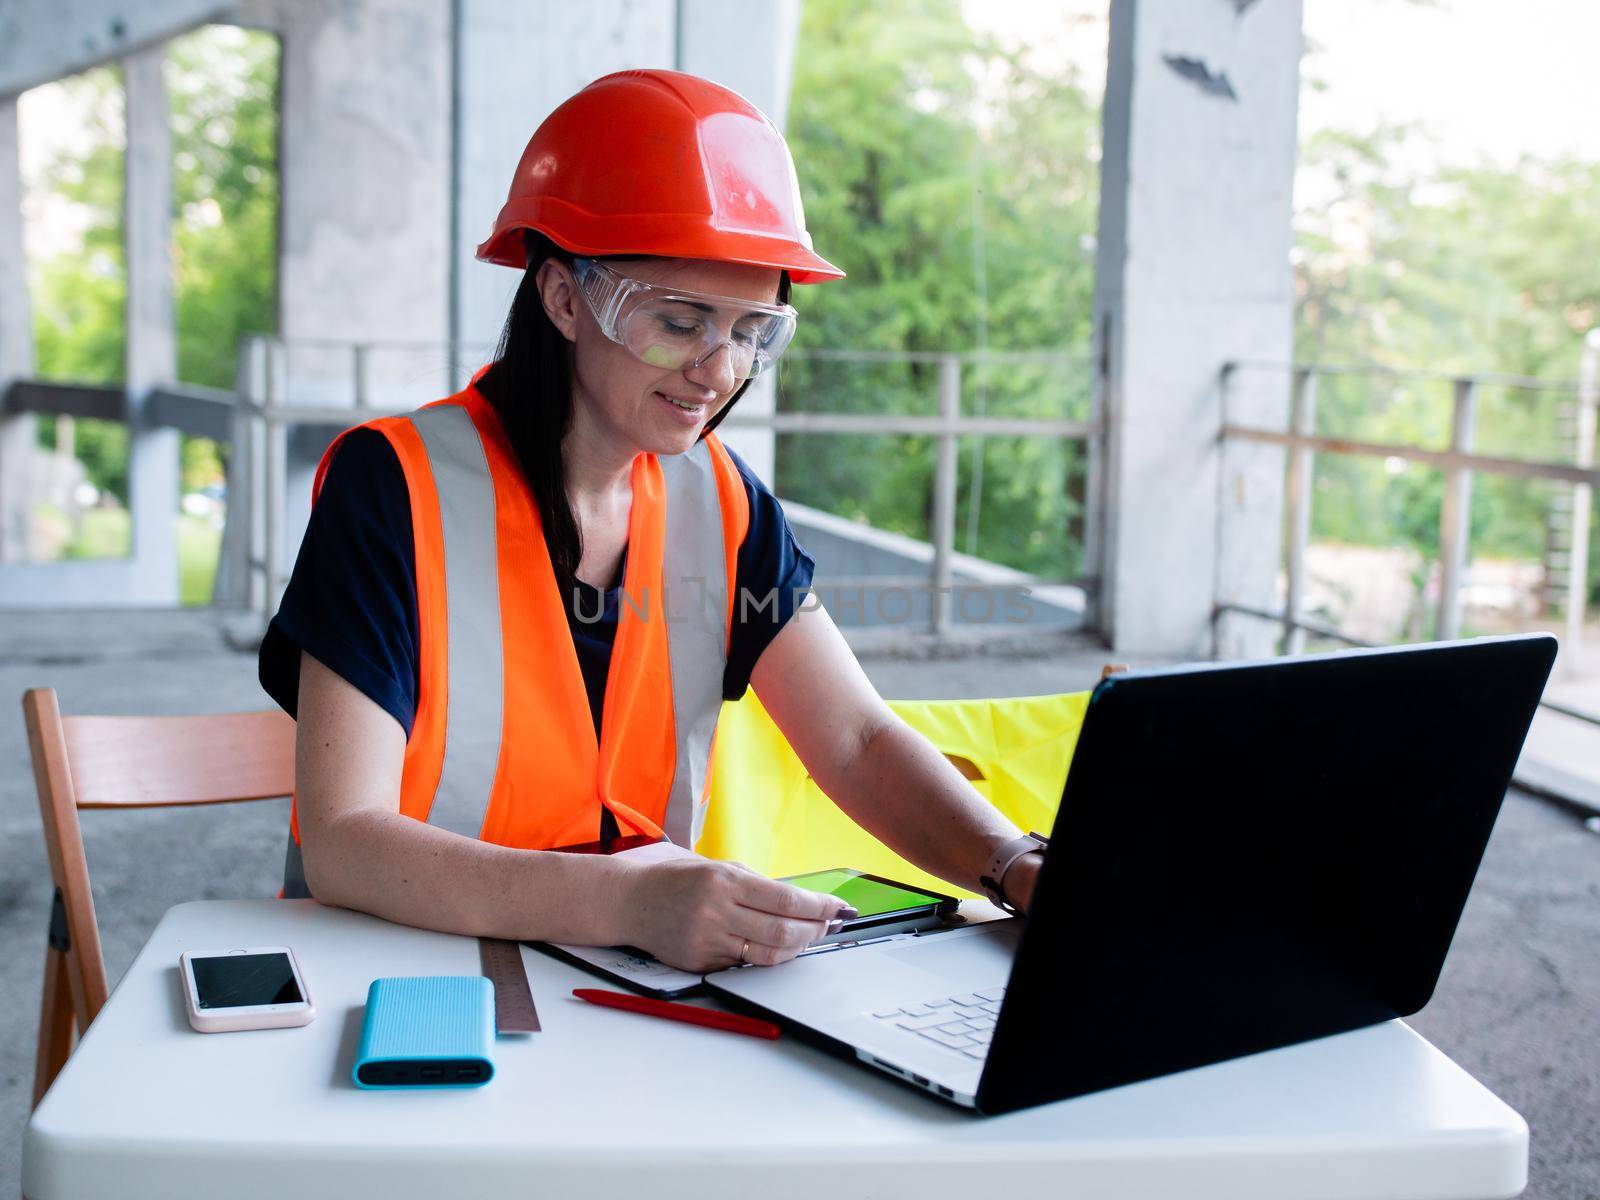 Engineer woman working on construction site examines building projects in laptop by Utlanov